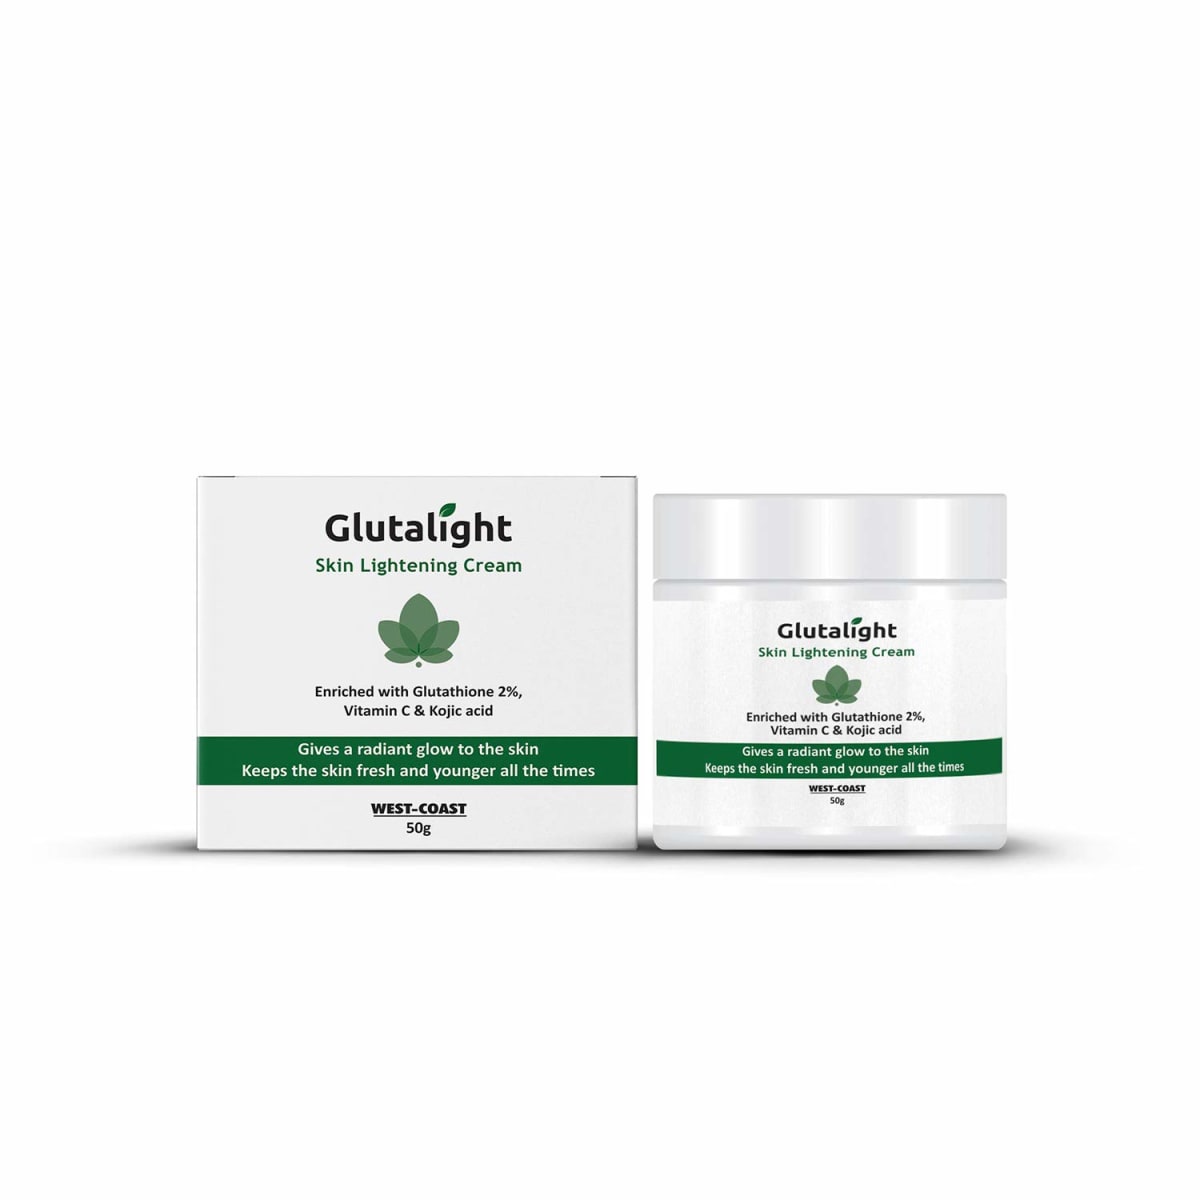 Glutalight Skin Lightening Cream with 2% Glutathione, 5% Vitamin C, 1% Kojic Acid, 3% Papaya Extract |For Glowing and Smoother Skin -50g